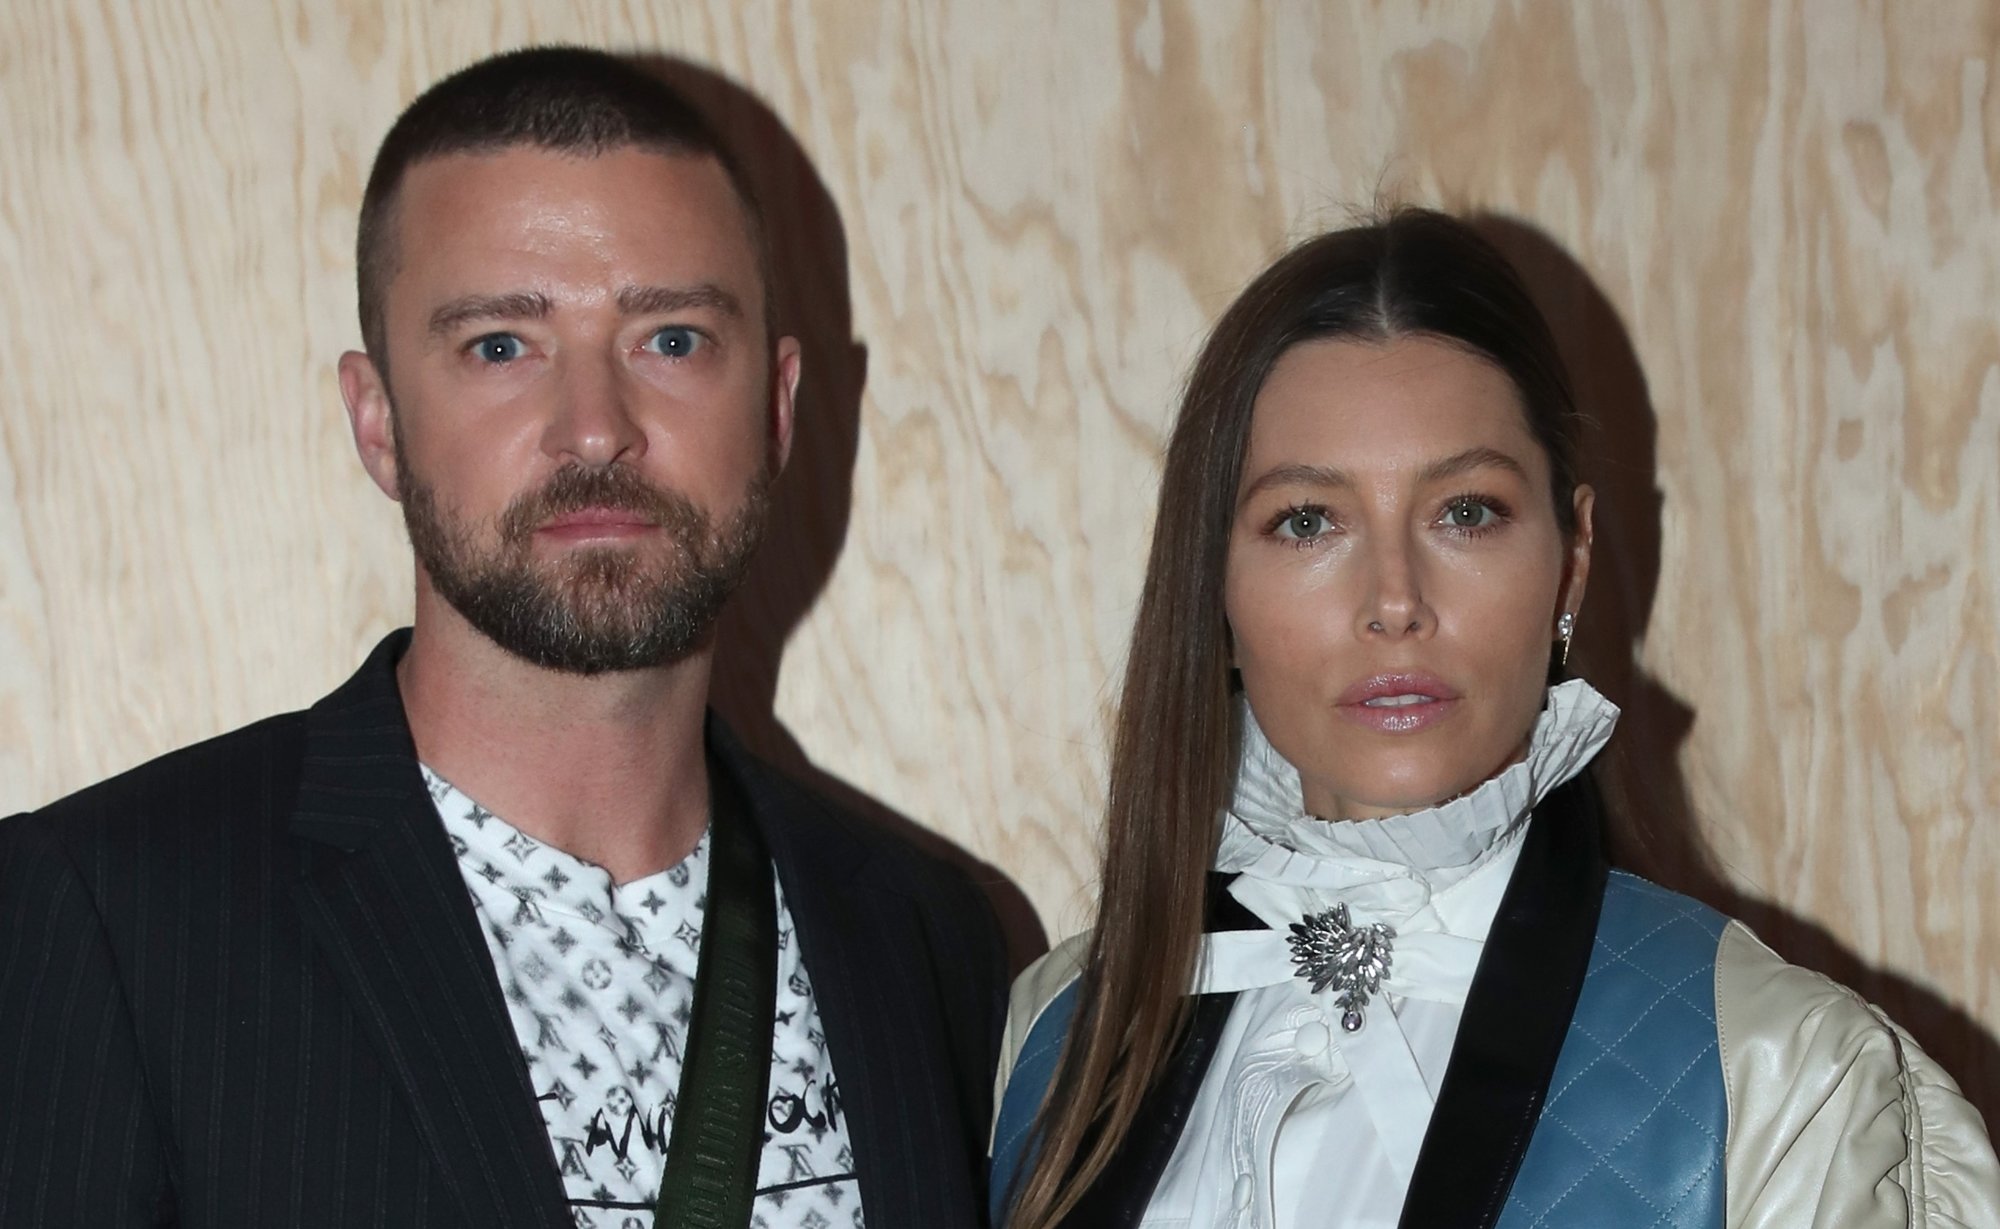 Justin Timberlake apologizes to family for his 'lapse in judgment